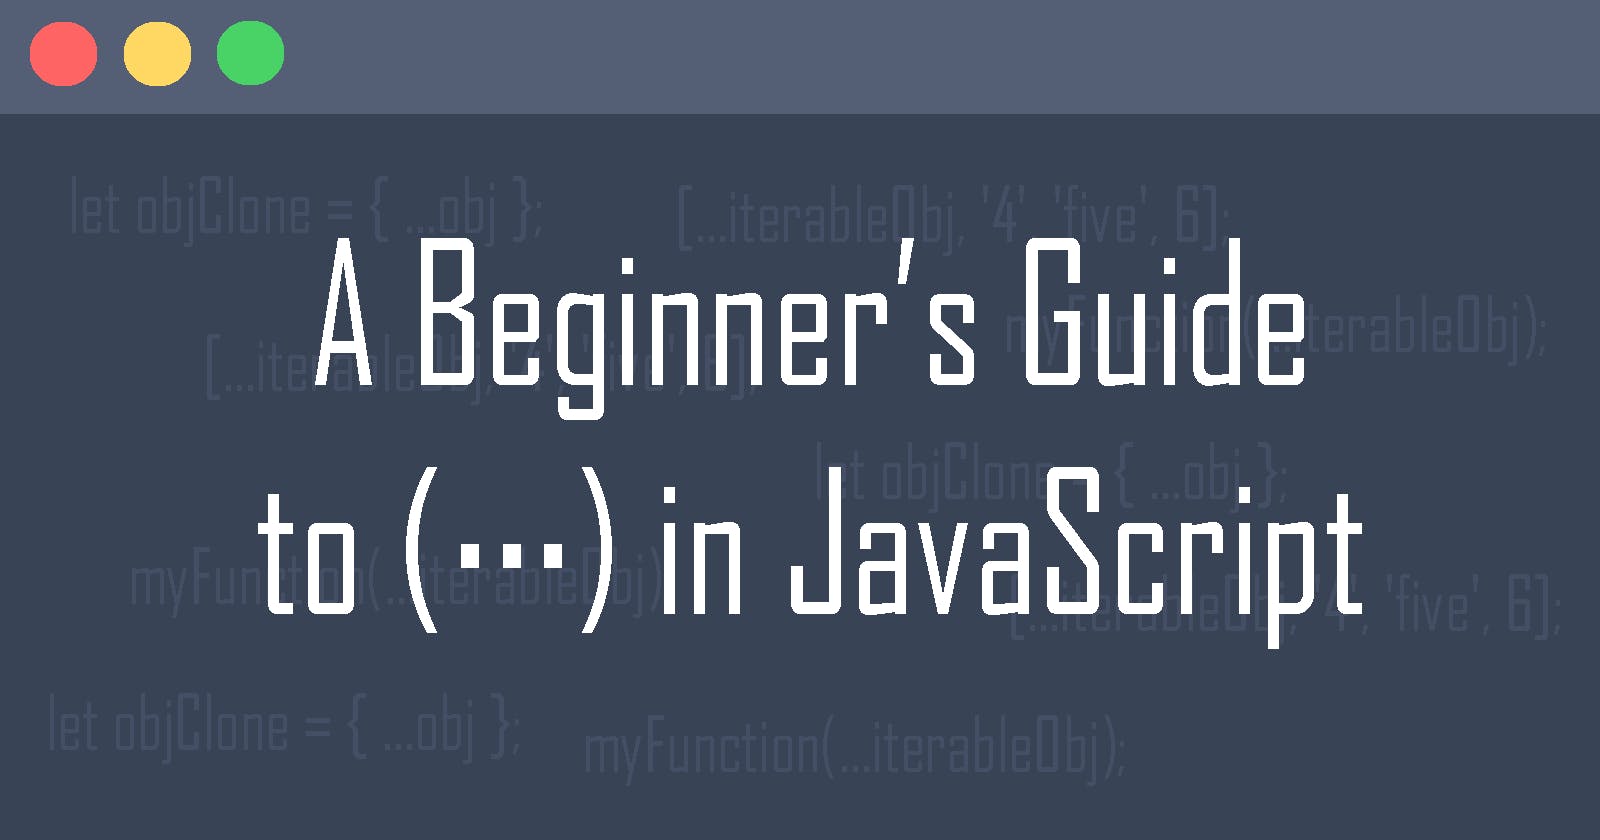 A Beginner's Guide to ... in JavaScript